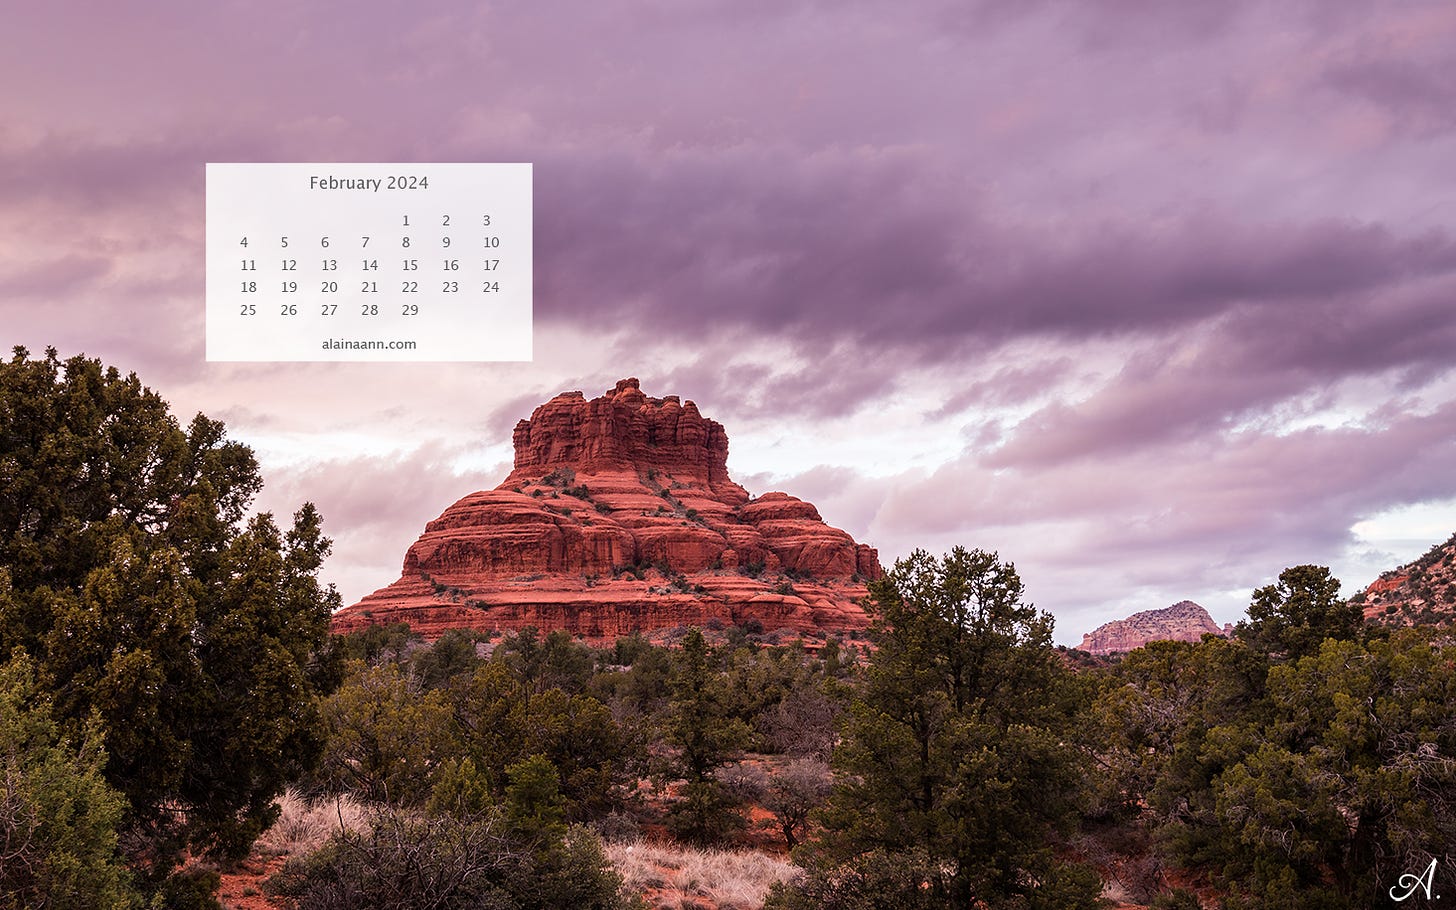 A bell shaped red rock formation, surrounded by green desert vegetation. The clouds in the sky are fluffy and purple. There's an overlaid calendar for the month of February in the upper left corner.